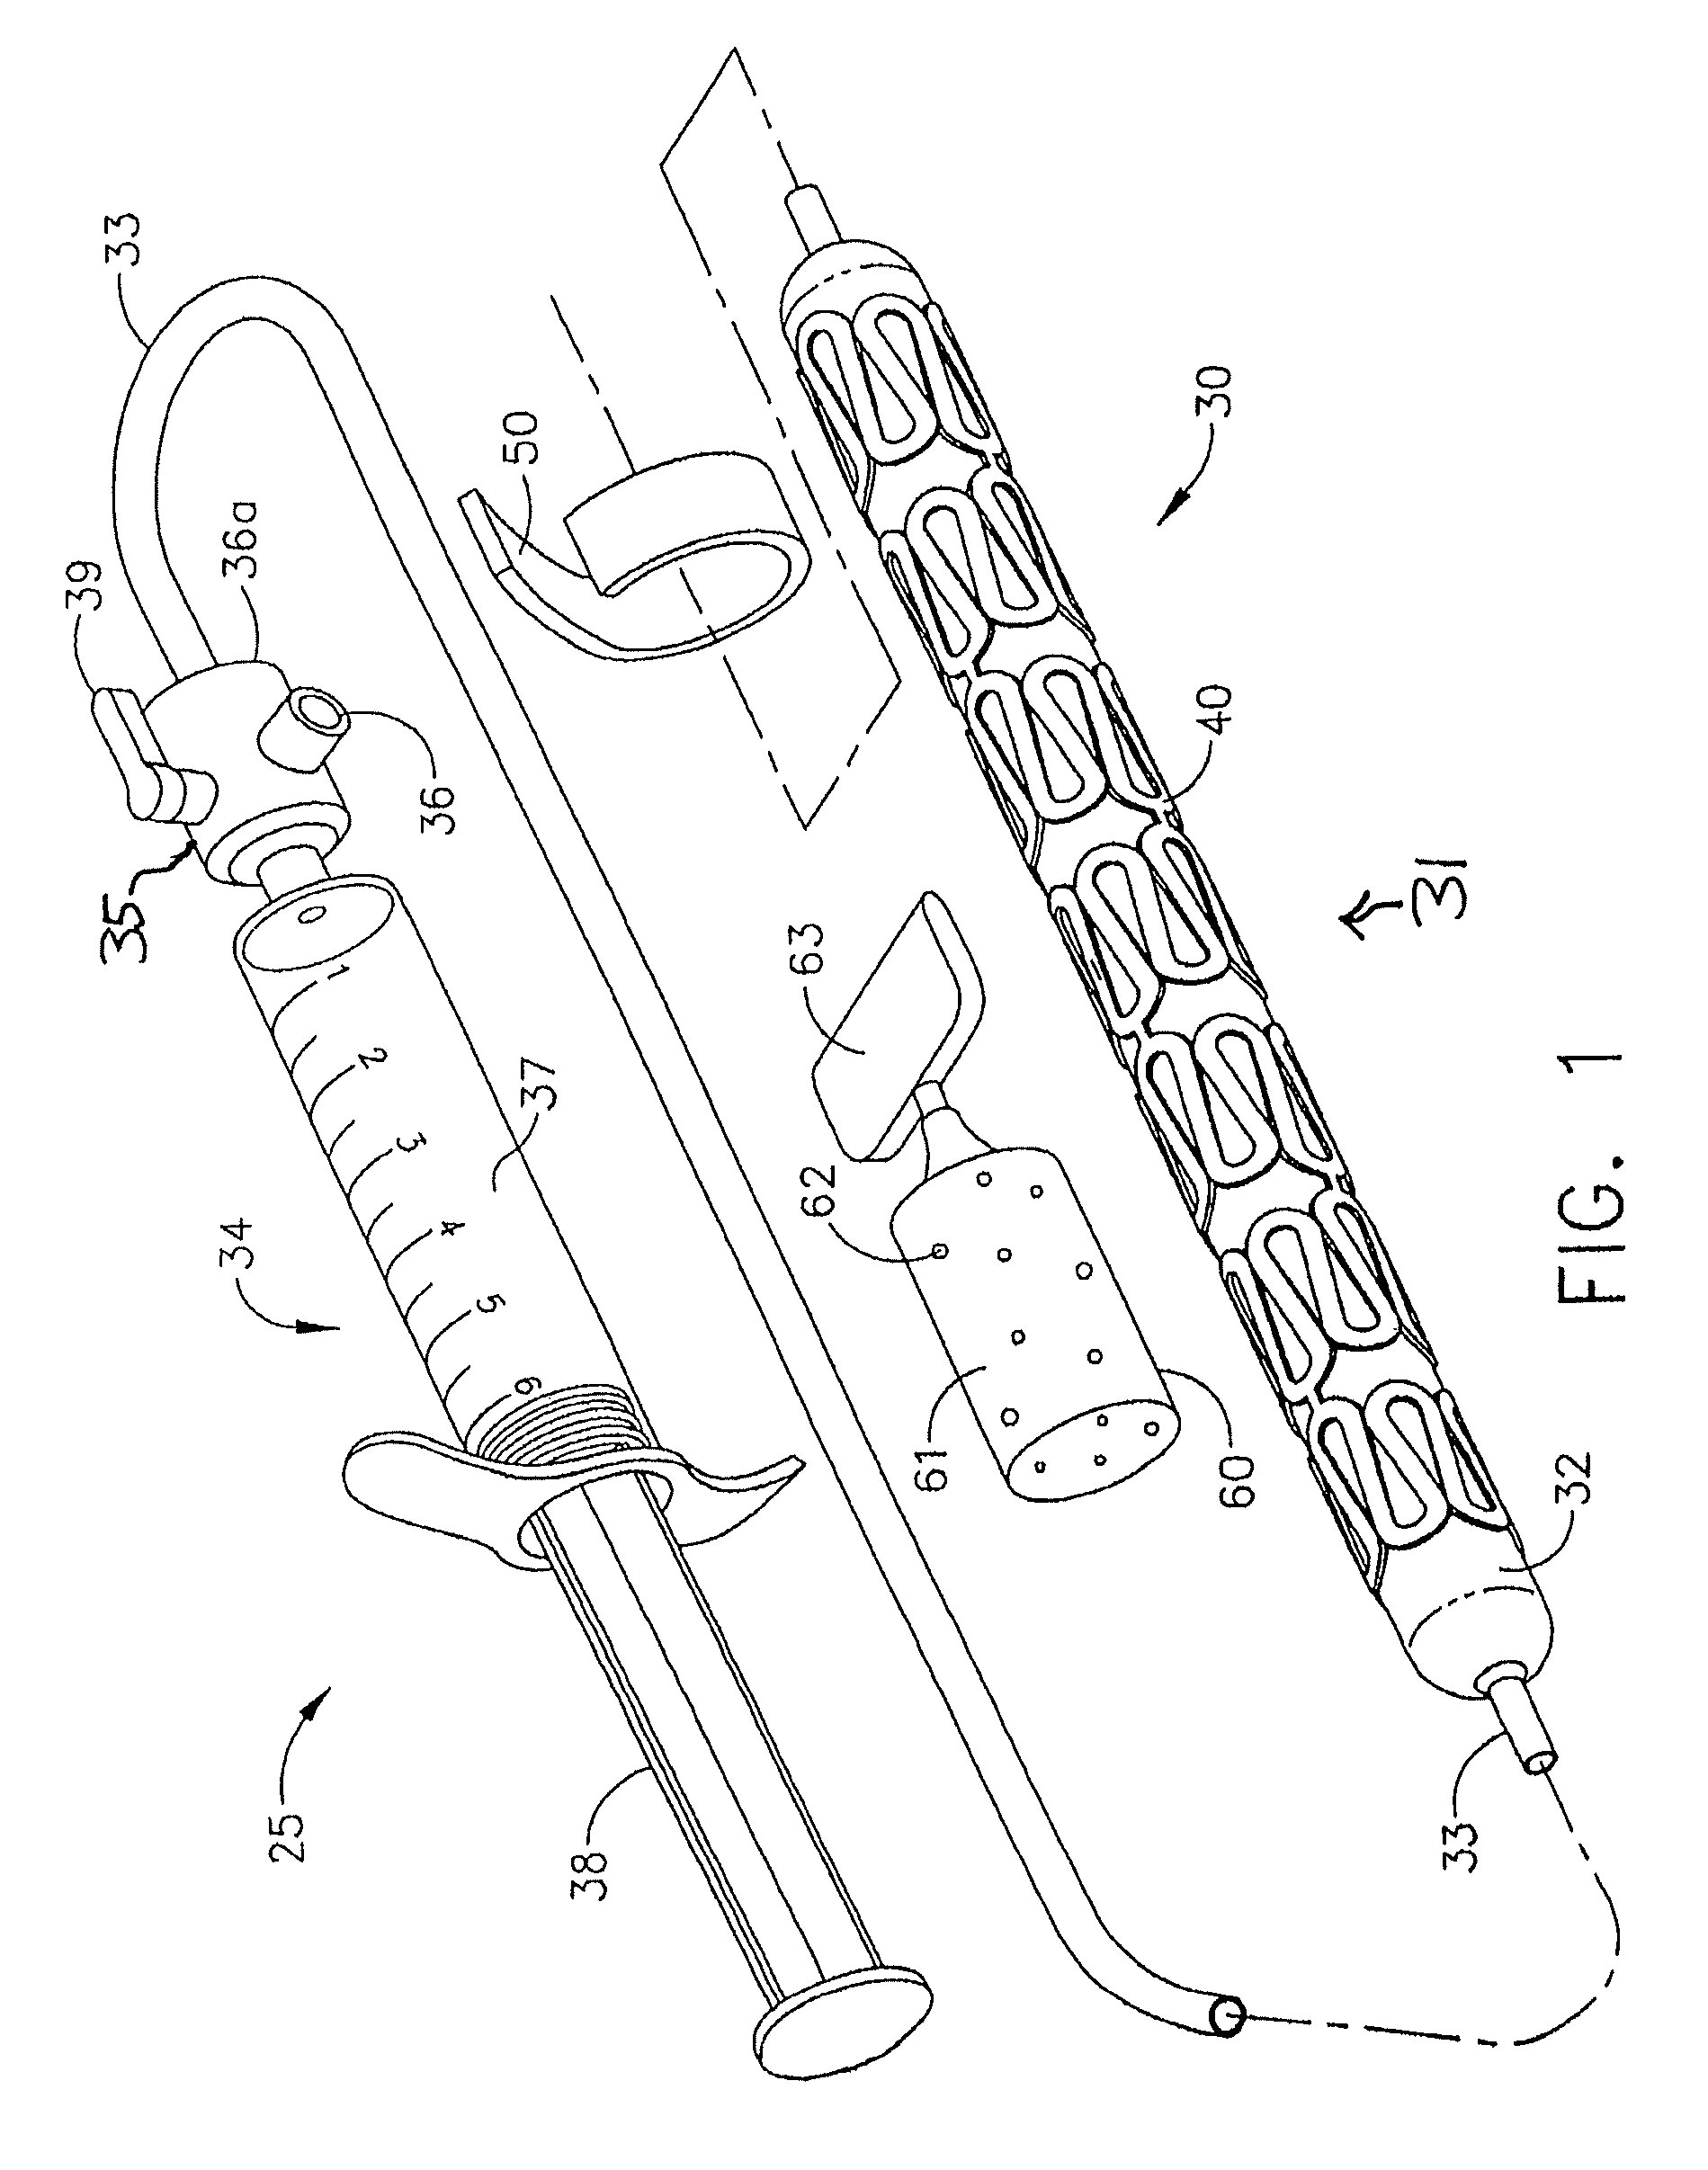 Method of performing an end-to-end anastomosis using a stent and an adhesive